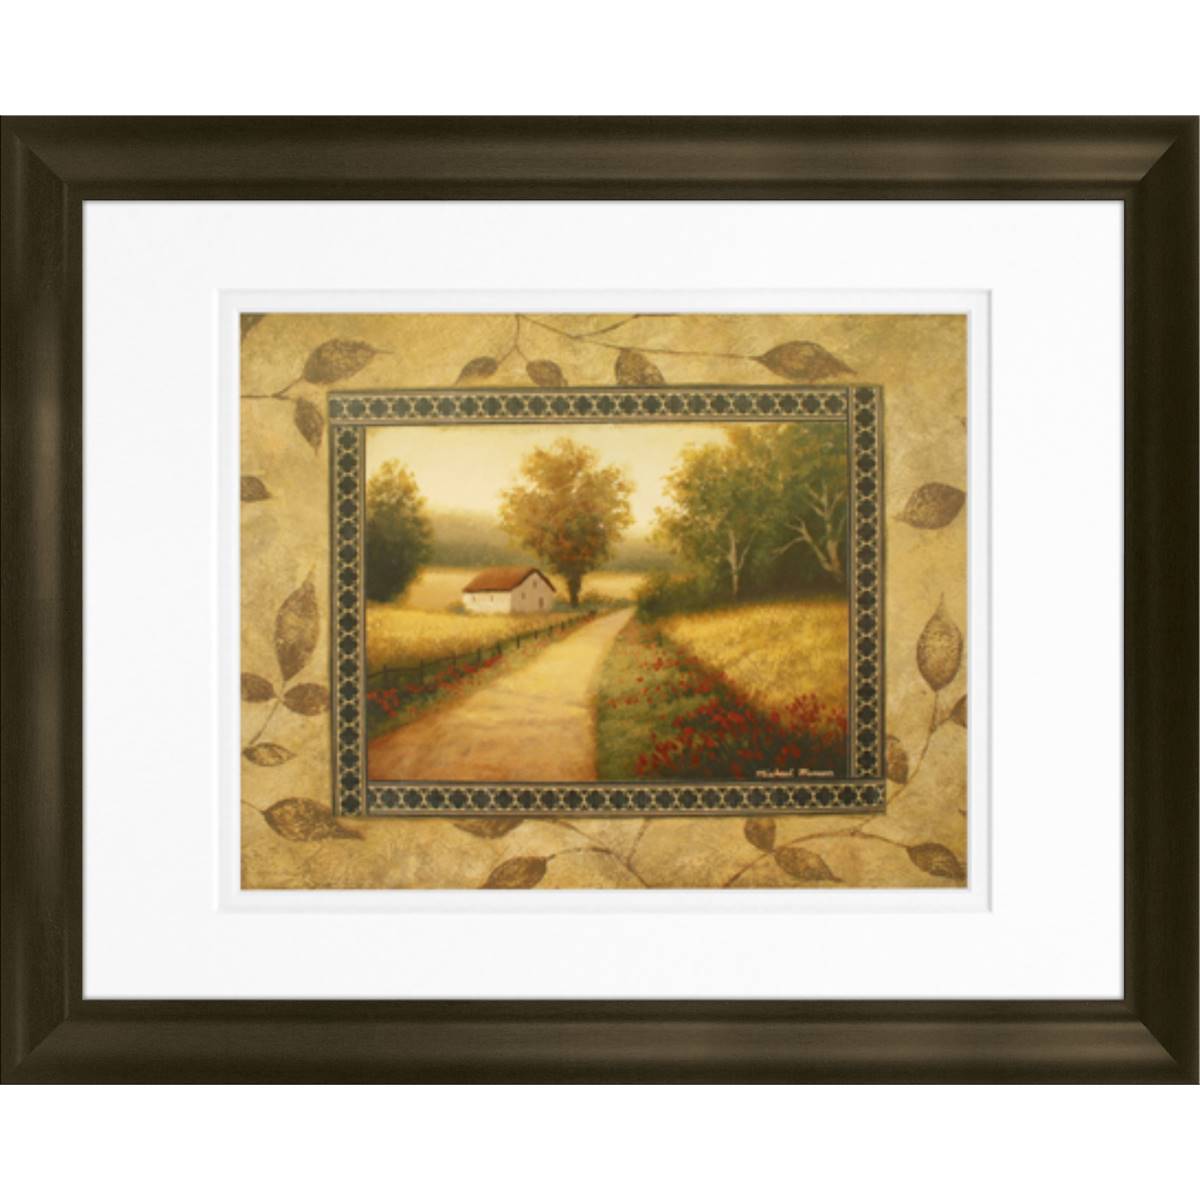 Timeless Frames(R) New Country Glimpse Framed Wall Art - 11x14